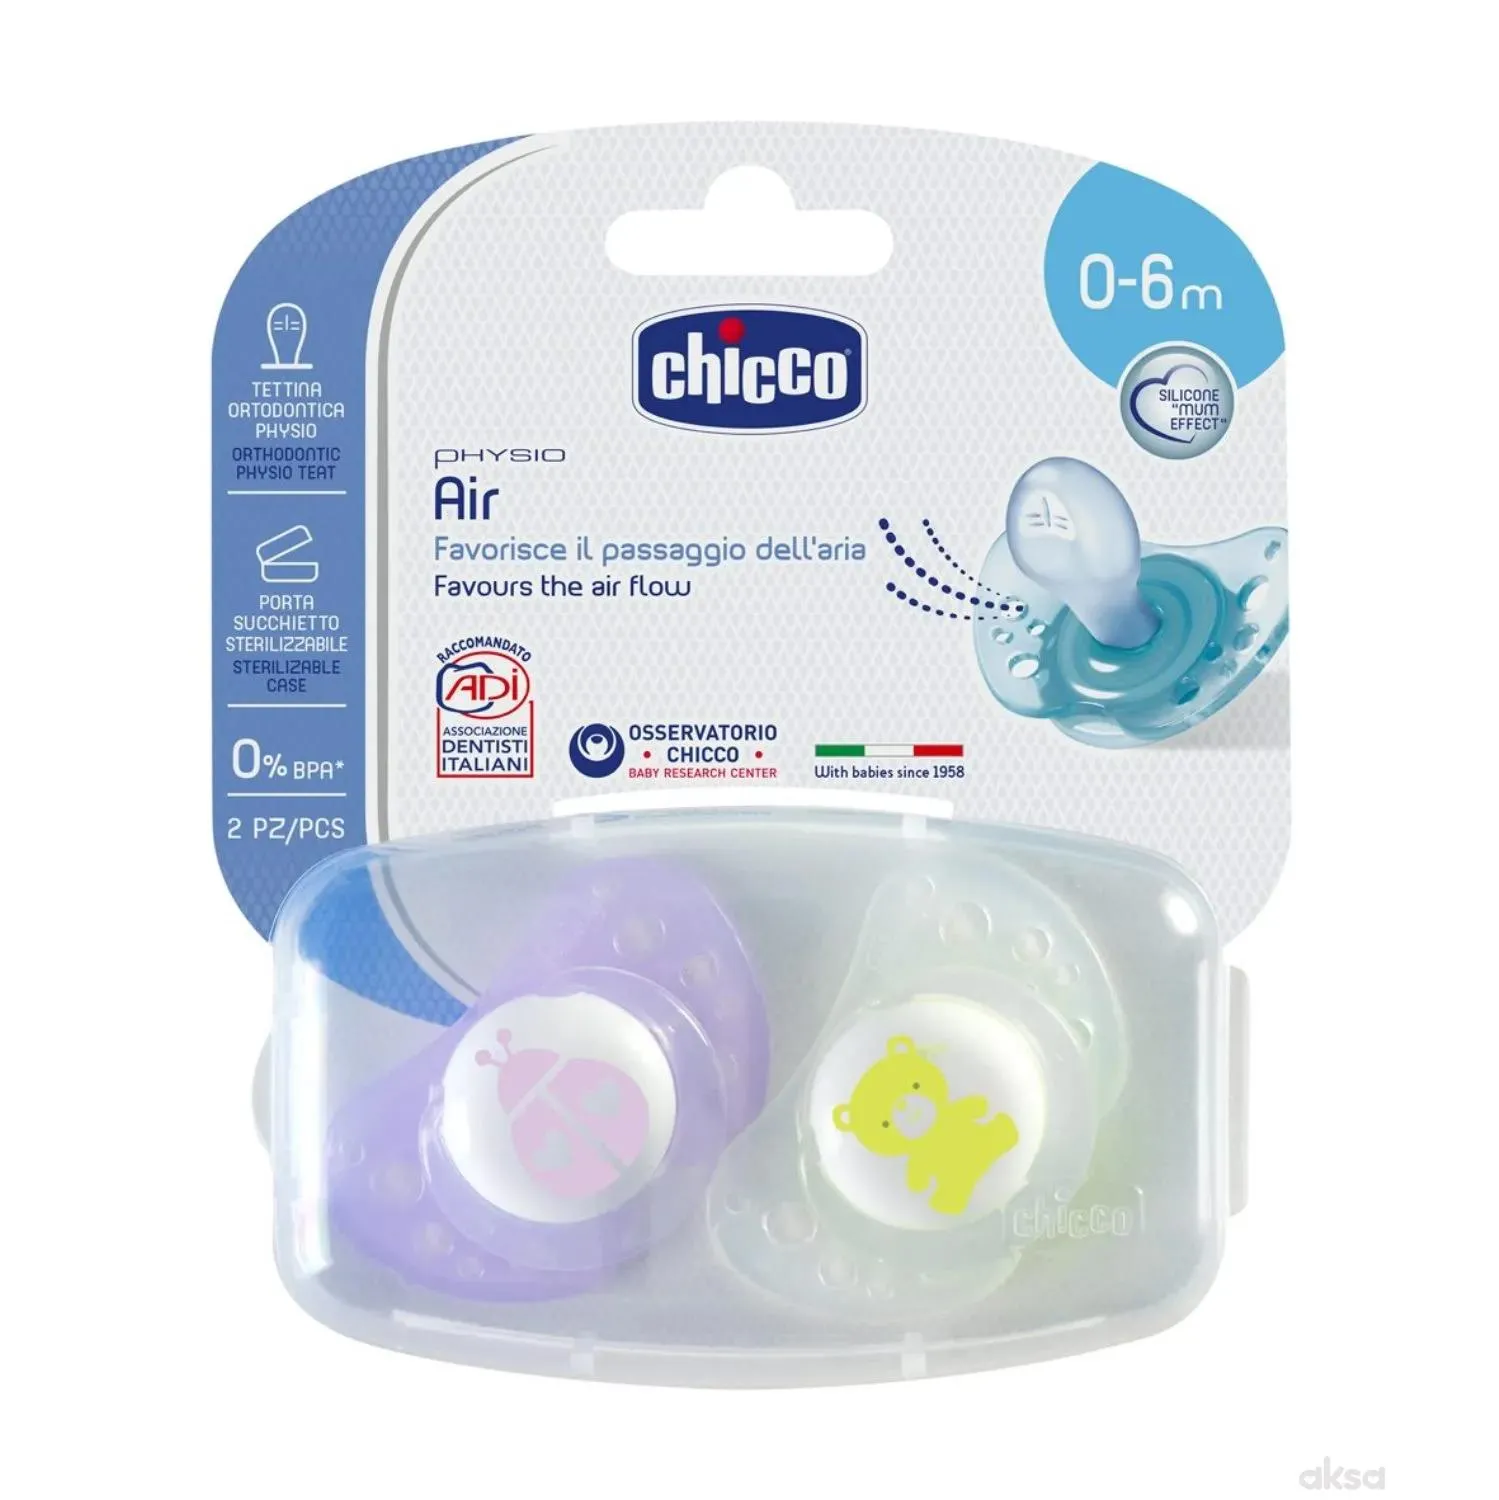 Chicco cucla Giotto Physio Air sil. roze 0-6m, 2k 